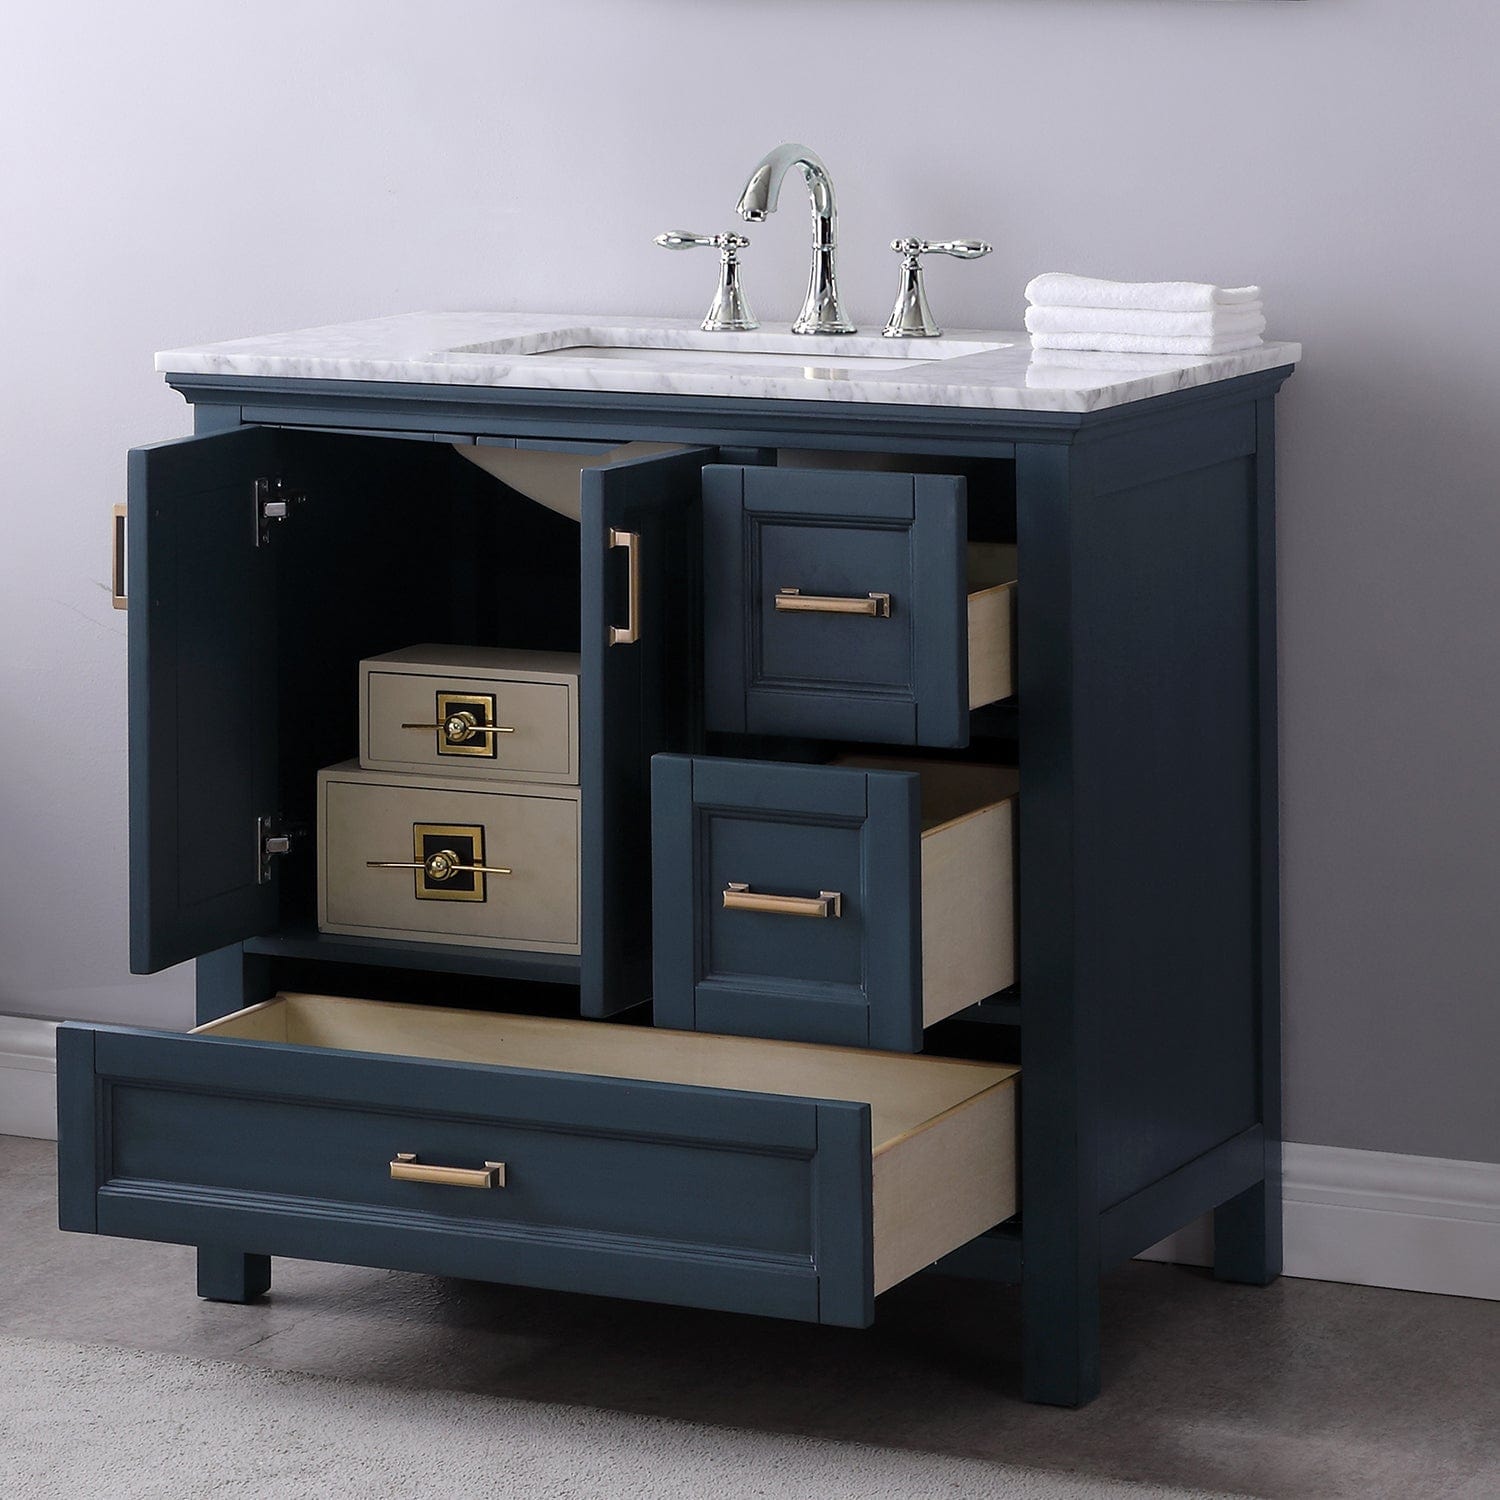 Altair Isla 36" Single Bathroom Vanity Set in Classic Blue and Carrara White Marble Countertop without Mirror 538036-CB-CA-NM - Molaix631112970808Vanity538036-CB-CA-NM